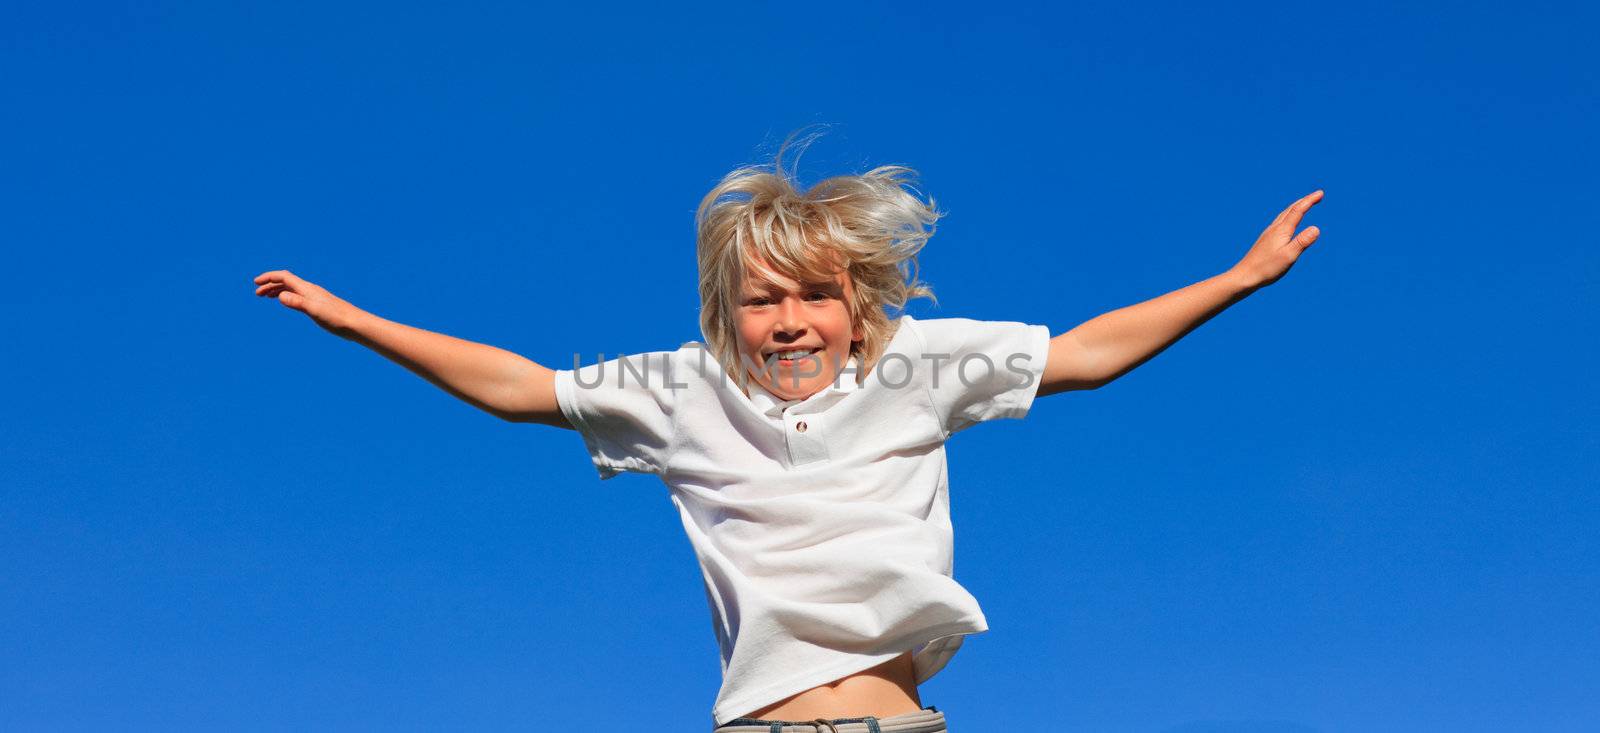 Young kid Jumping in the air by Wavebreakmedia